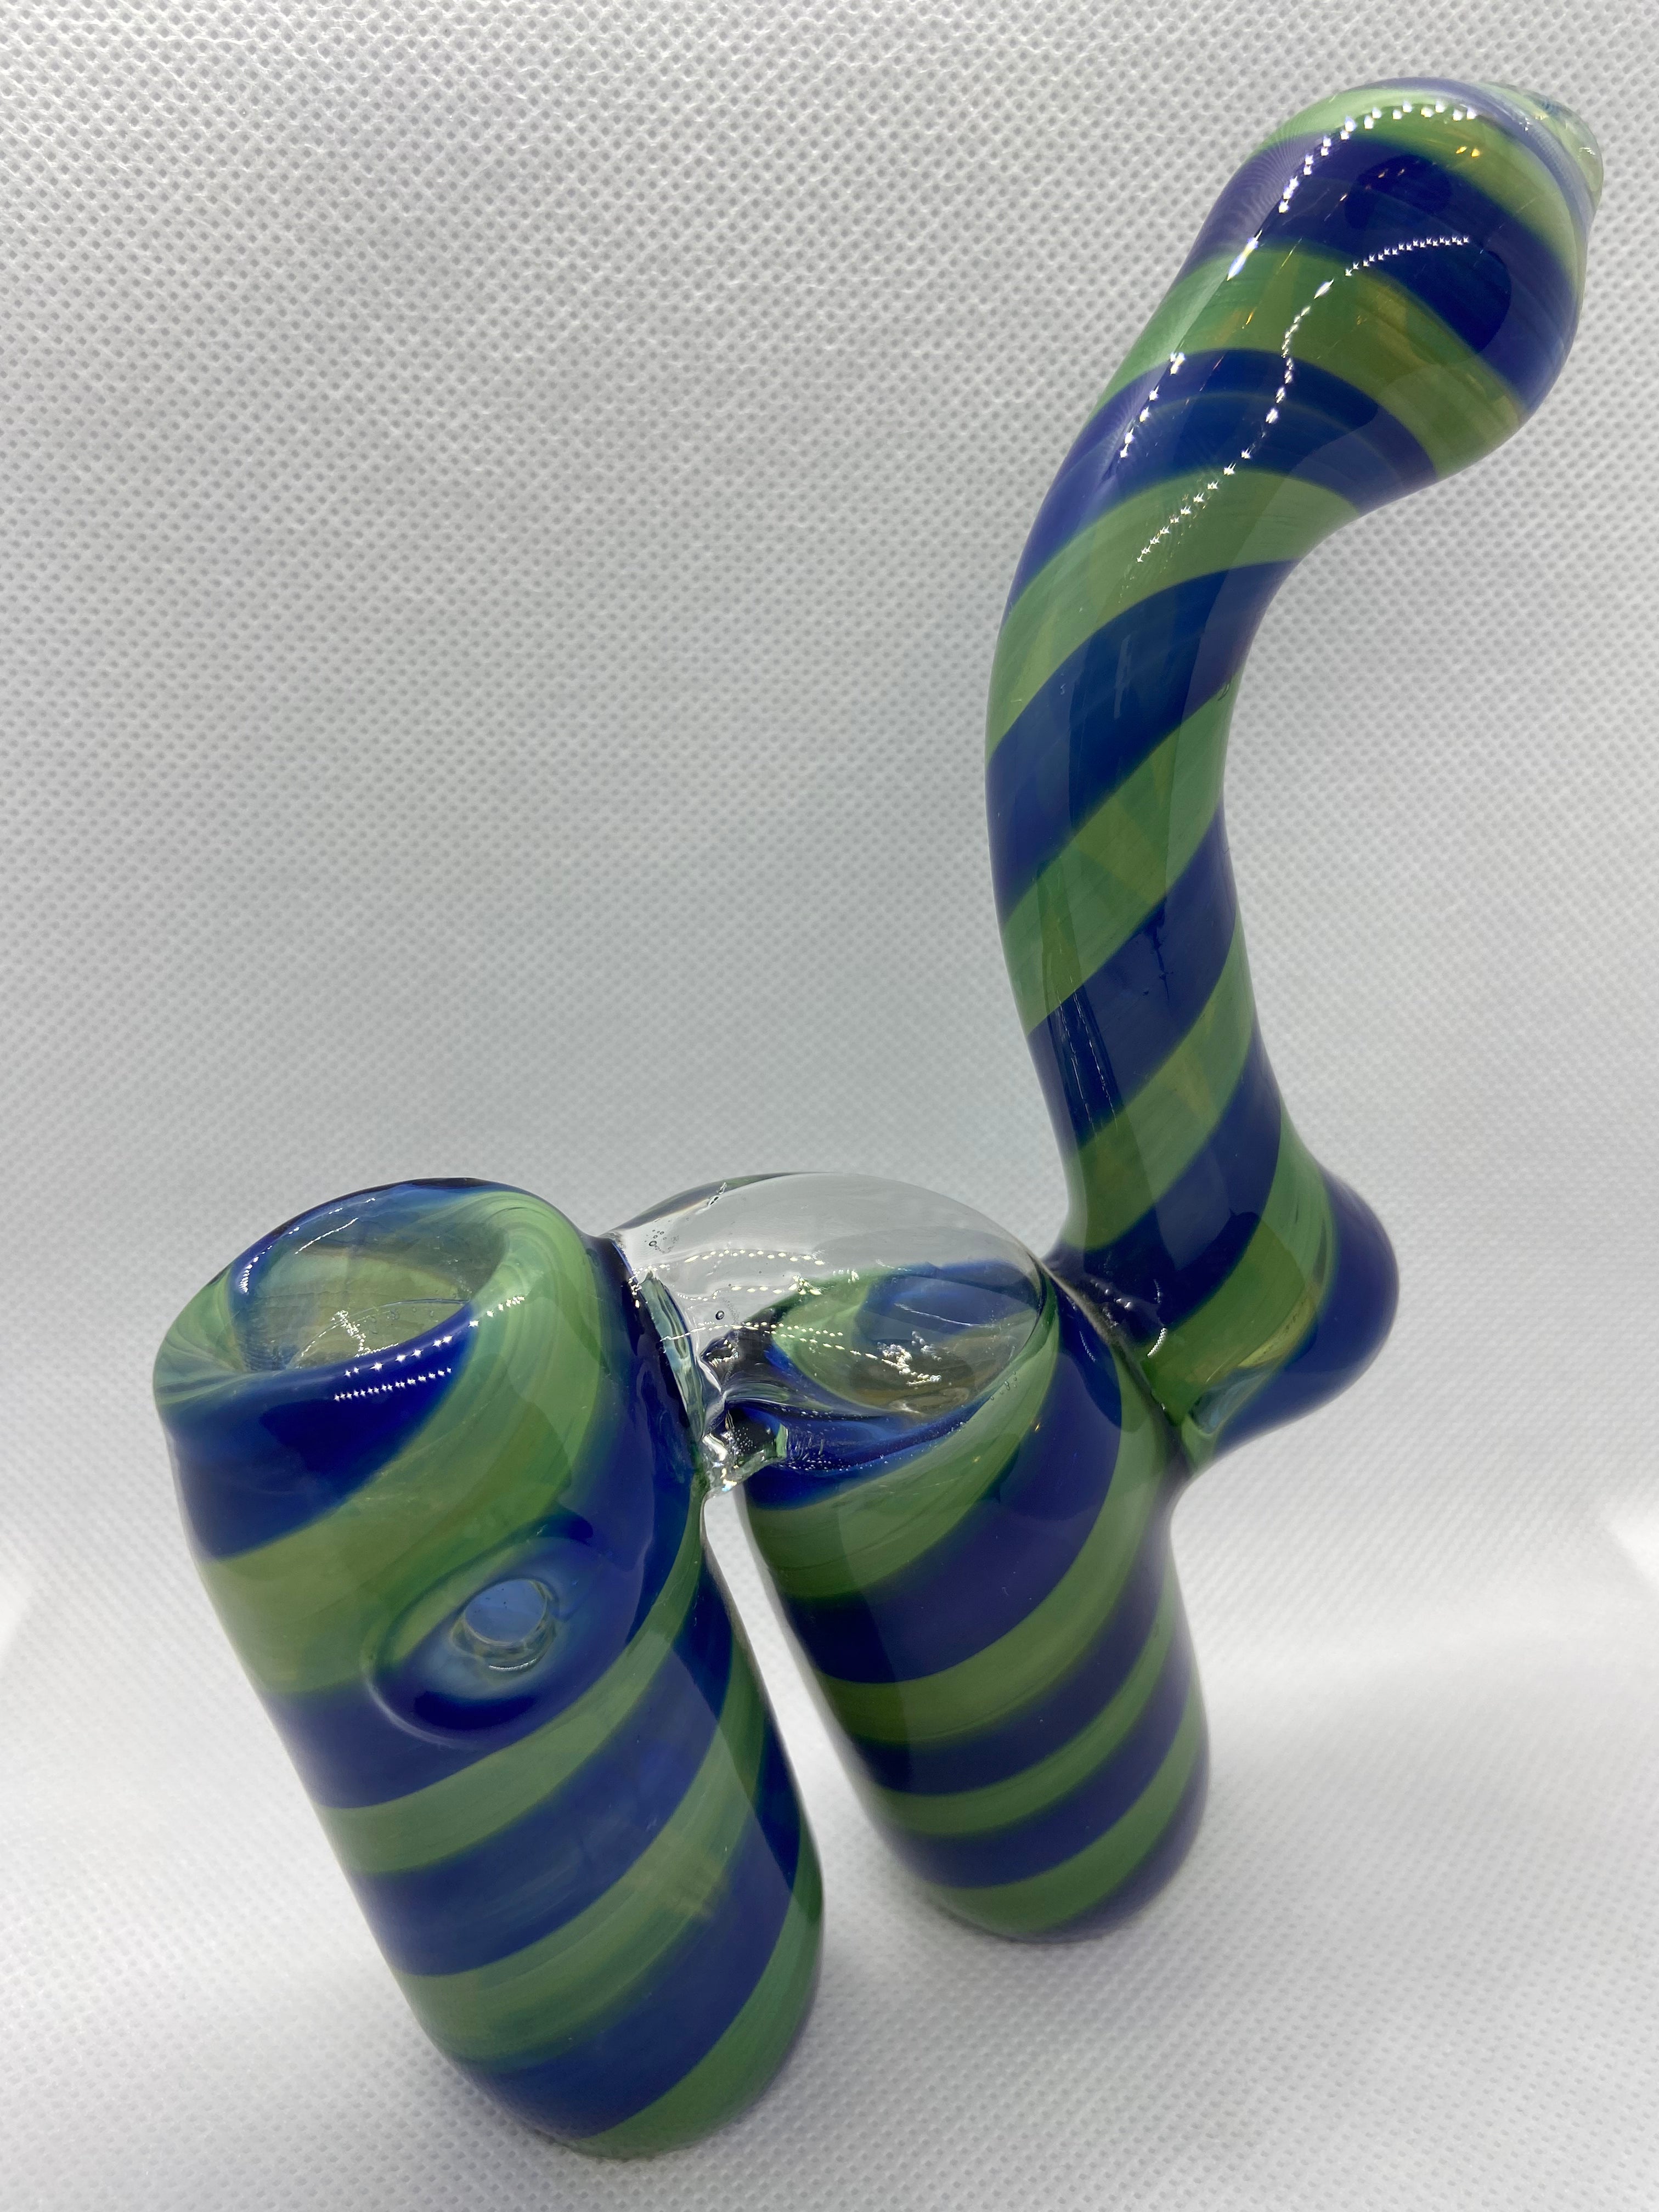 Double chamber bubbler - Limitless Puff